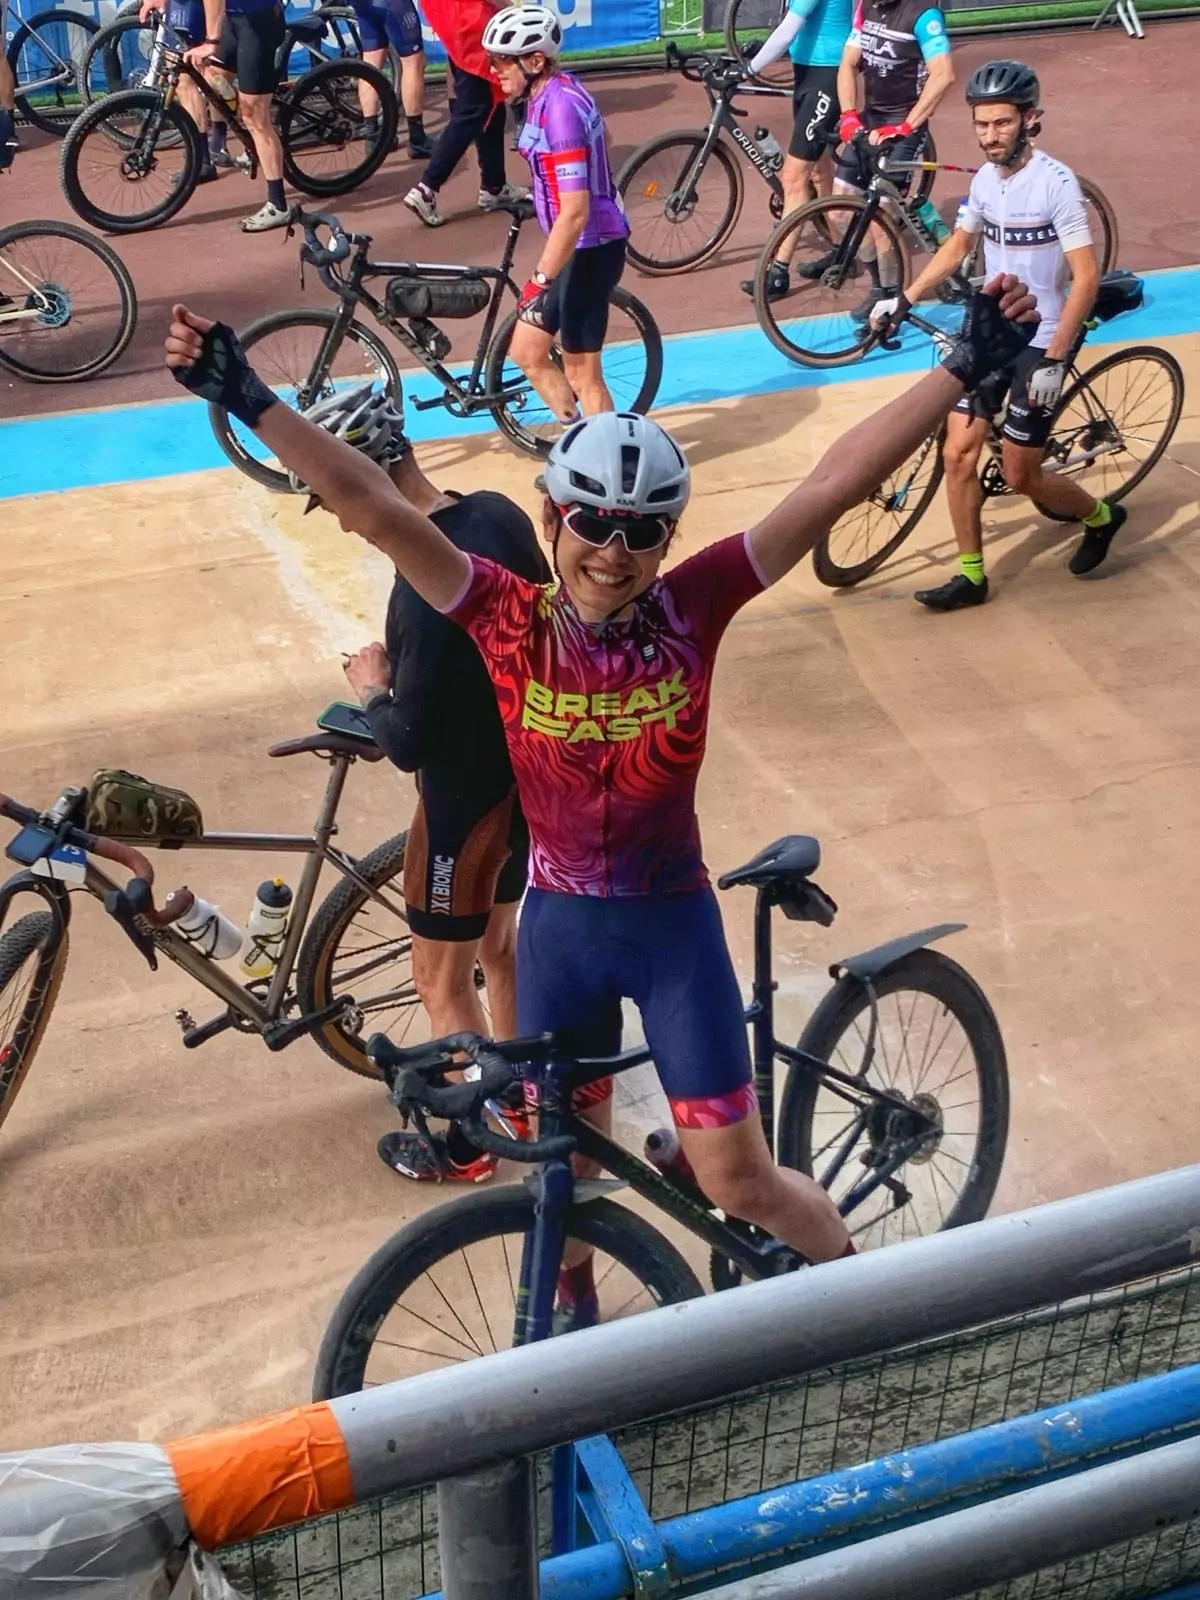 Claire Law raises her arms in celebration from the velodrome after finishing the Roubaix Sportif